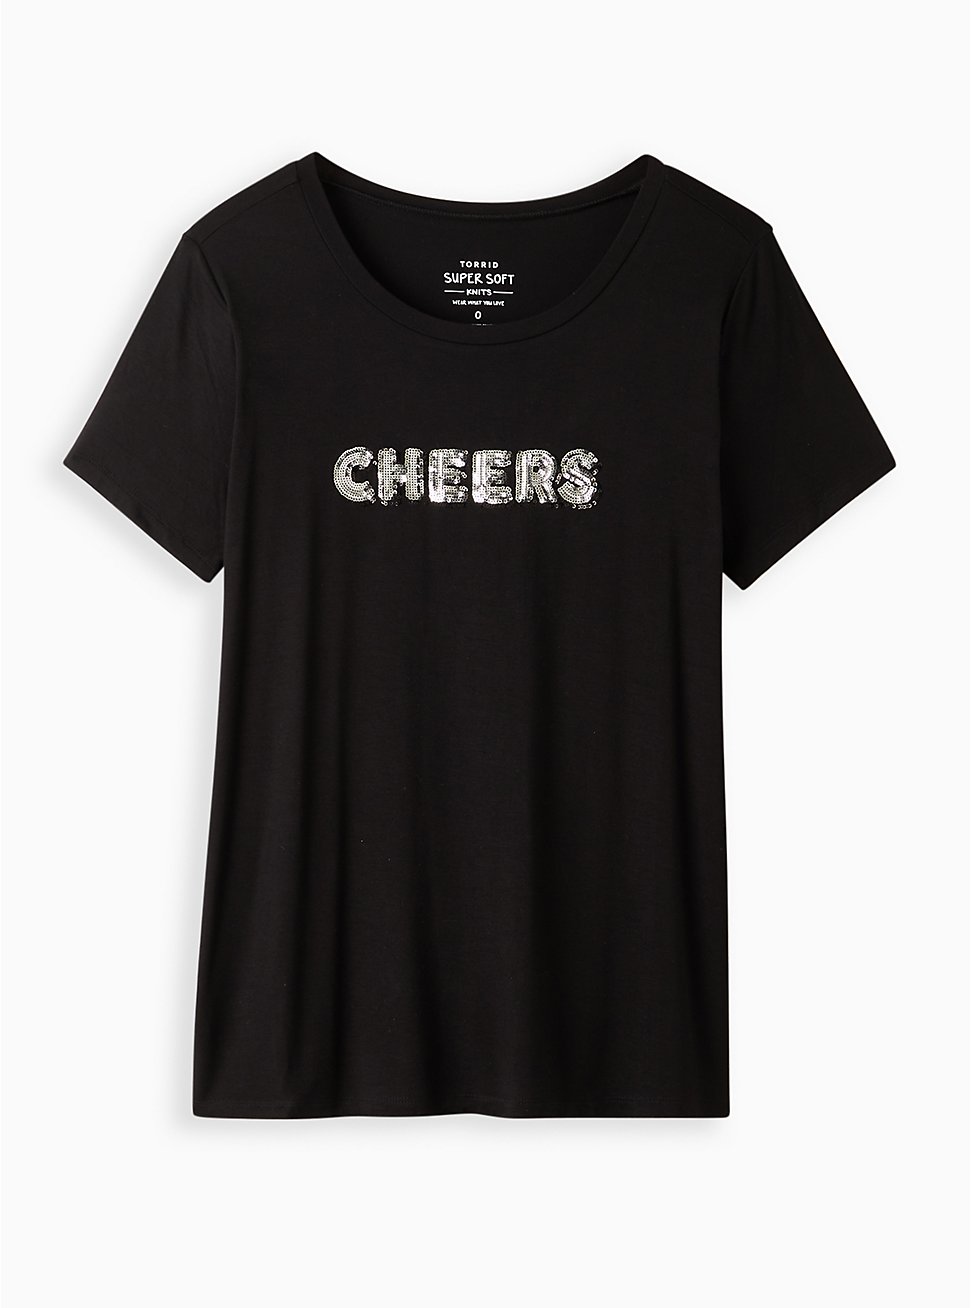 Plus Size Fitted Crew Tee - Super Soft Cheers Black, DEEP BLACK, hi-res